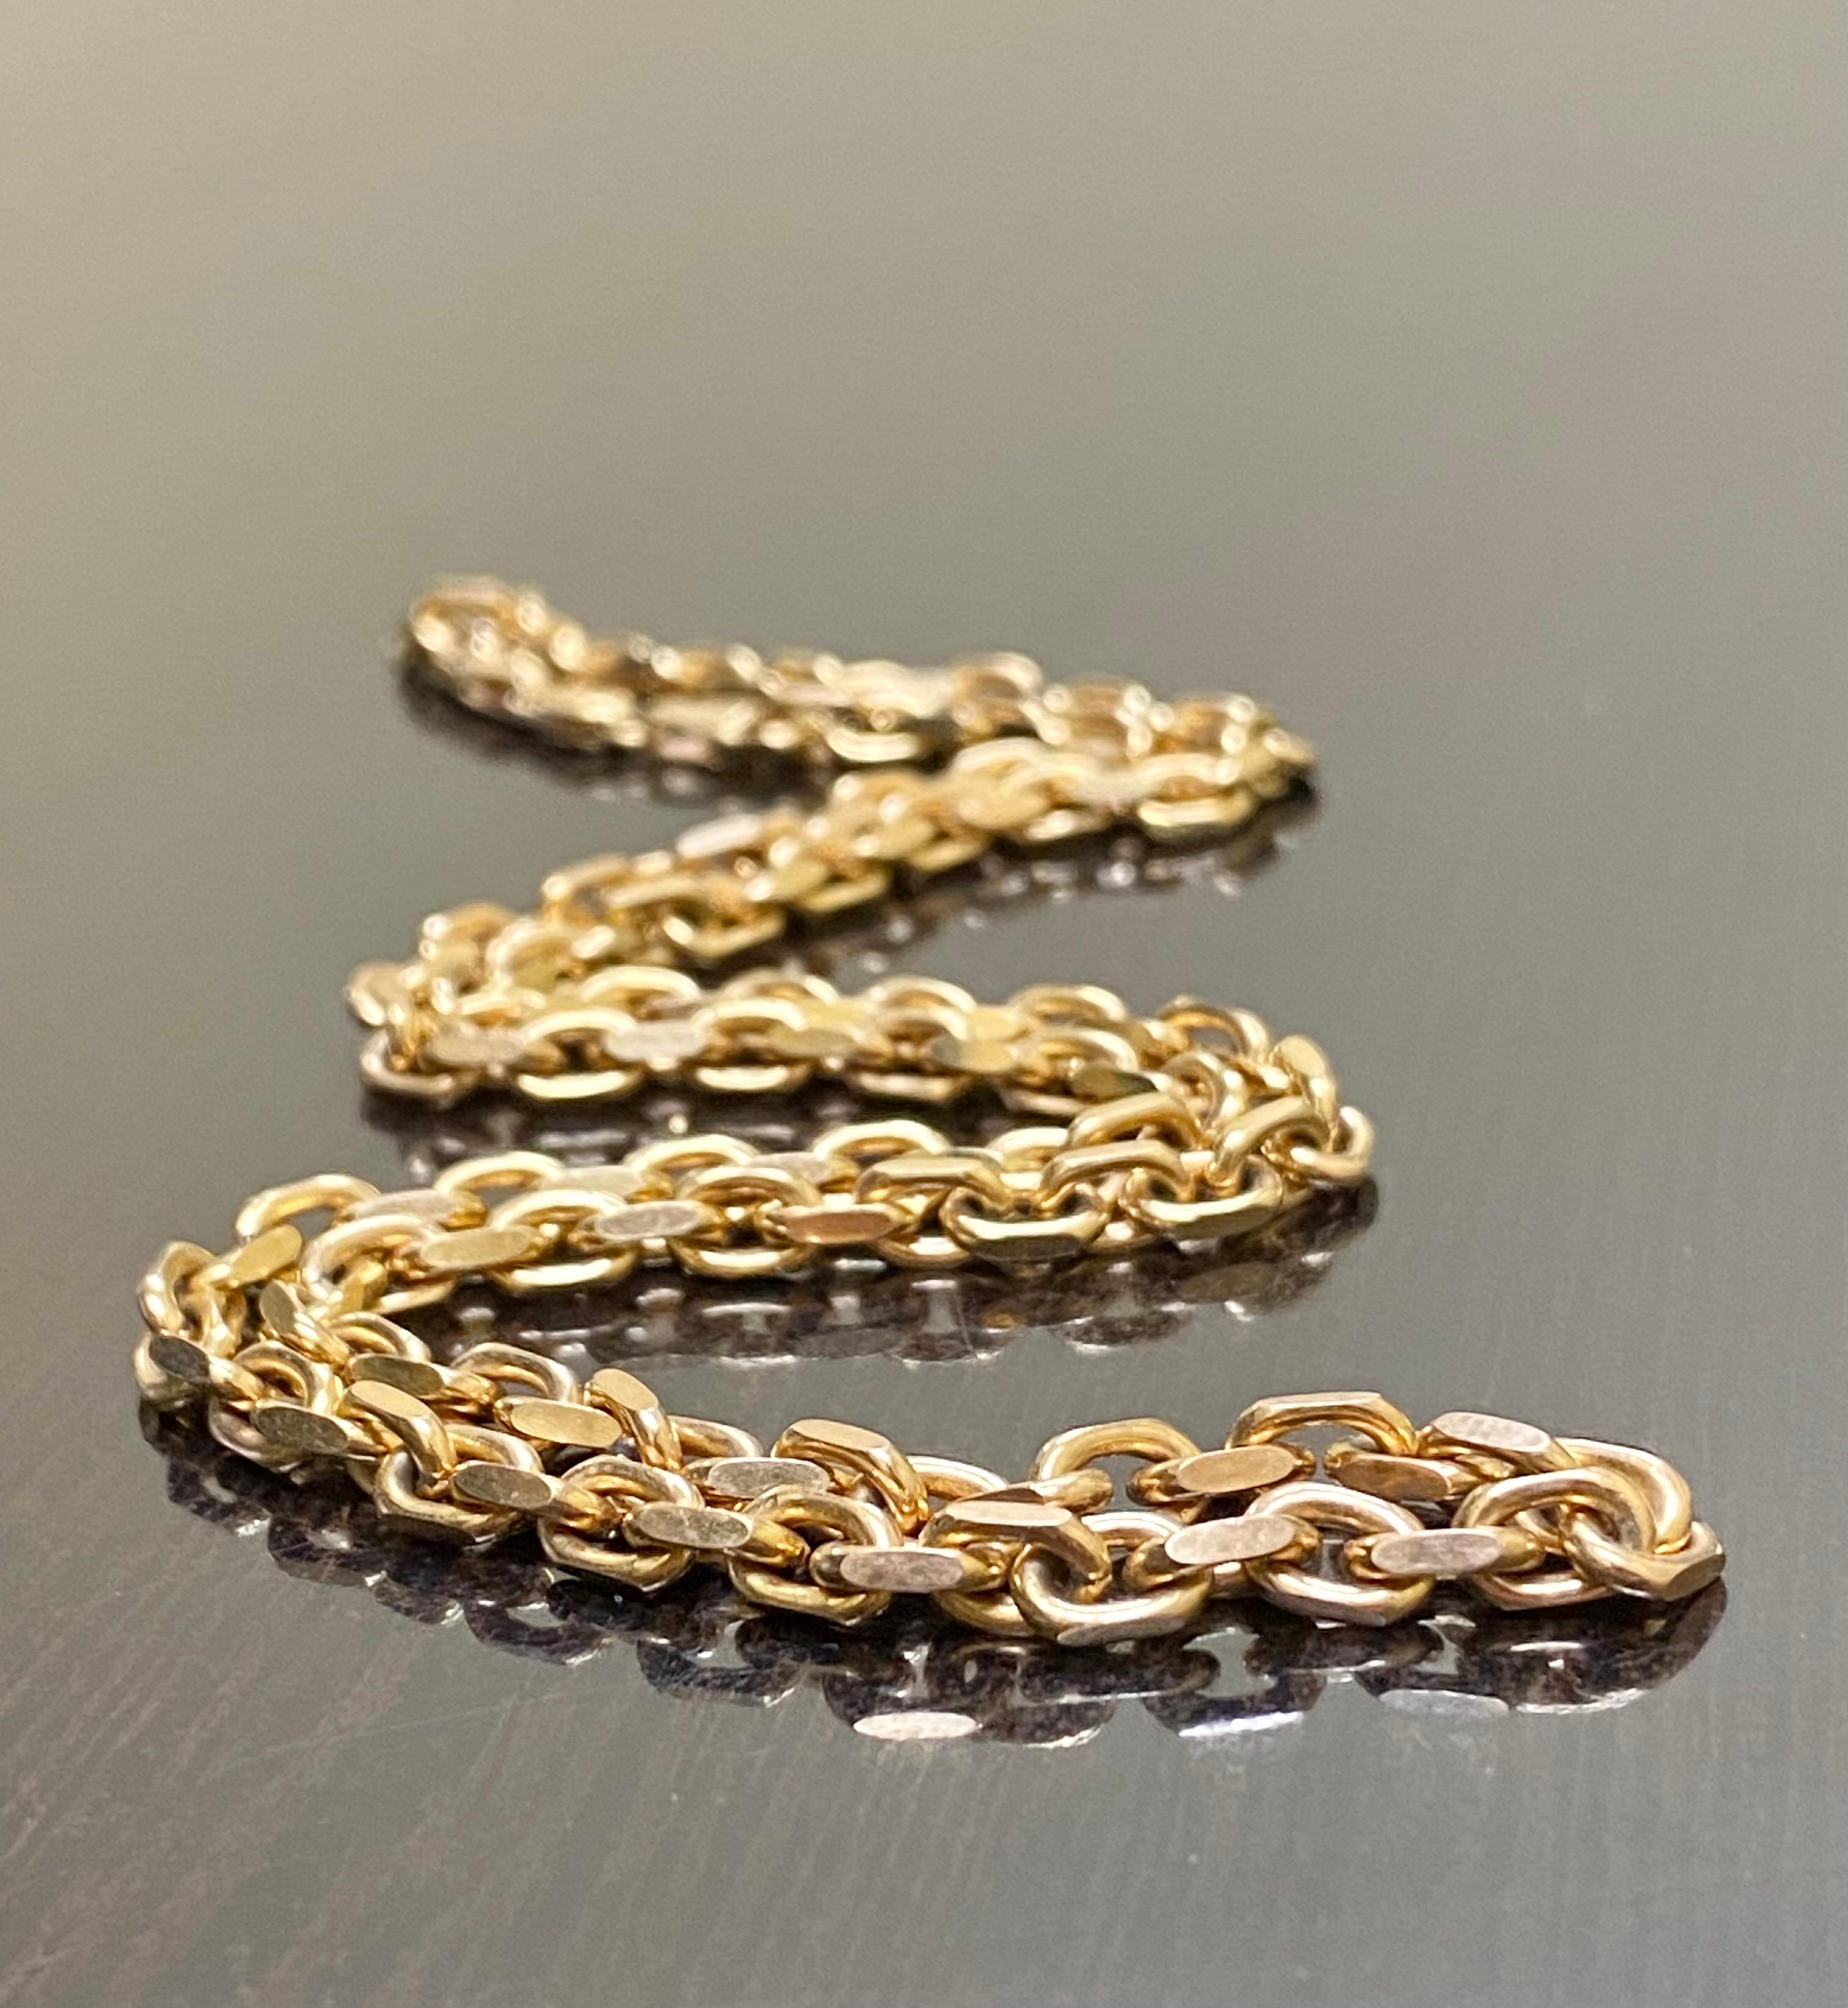 DeKara Designs Collection

Metal- 18K Rose Gold, .750.

Measurements- 22 Inches Long, 4.25 MM Width. 44 Grams.

Beautiful Handmade 18K Rose Gold Hermes Link  chain/necklace. This chain is 4.25 mm thick, and is 22 inches in length. The look, feel,